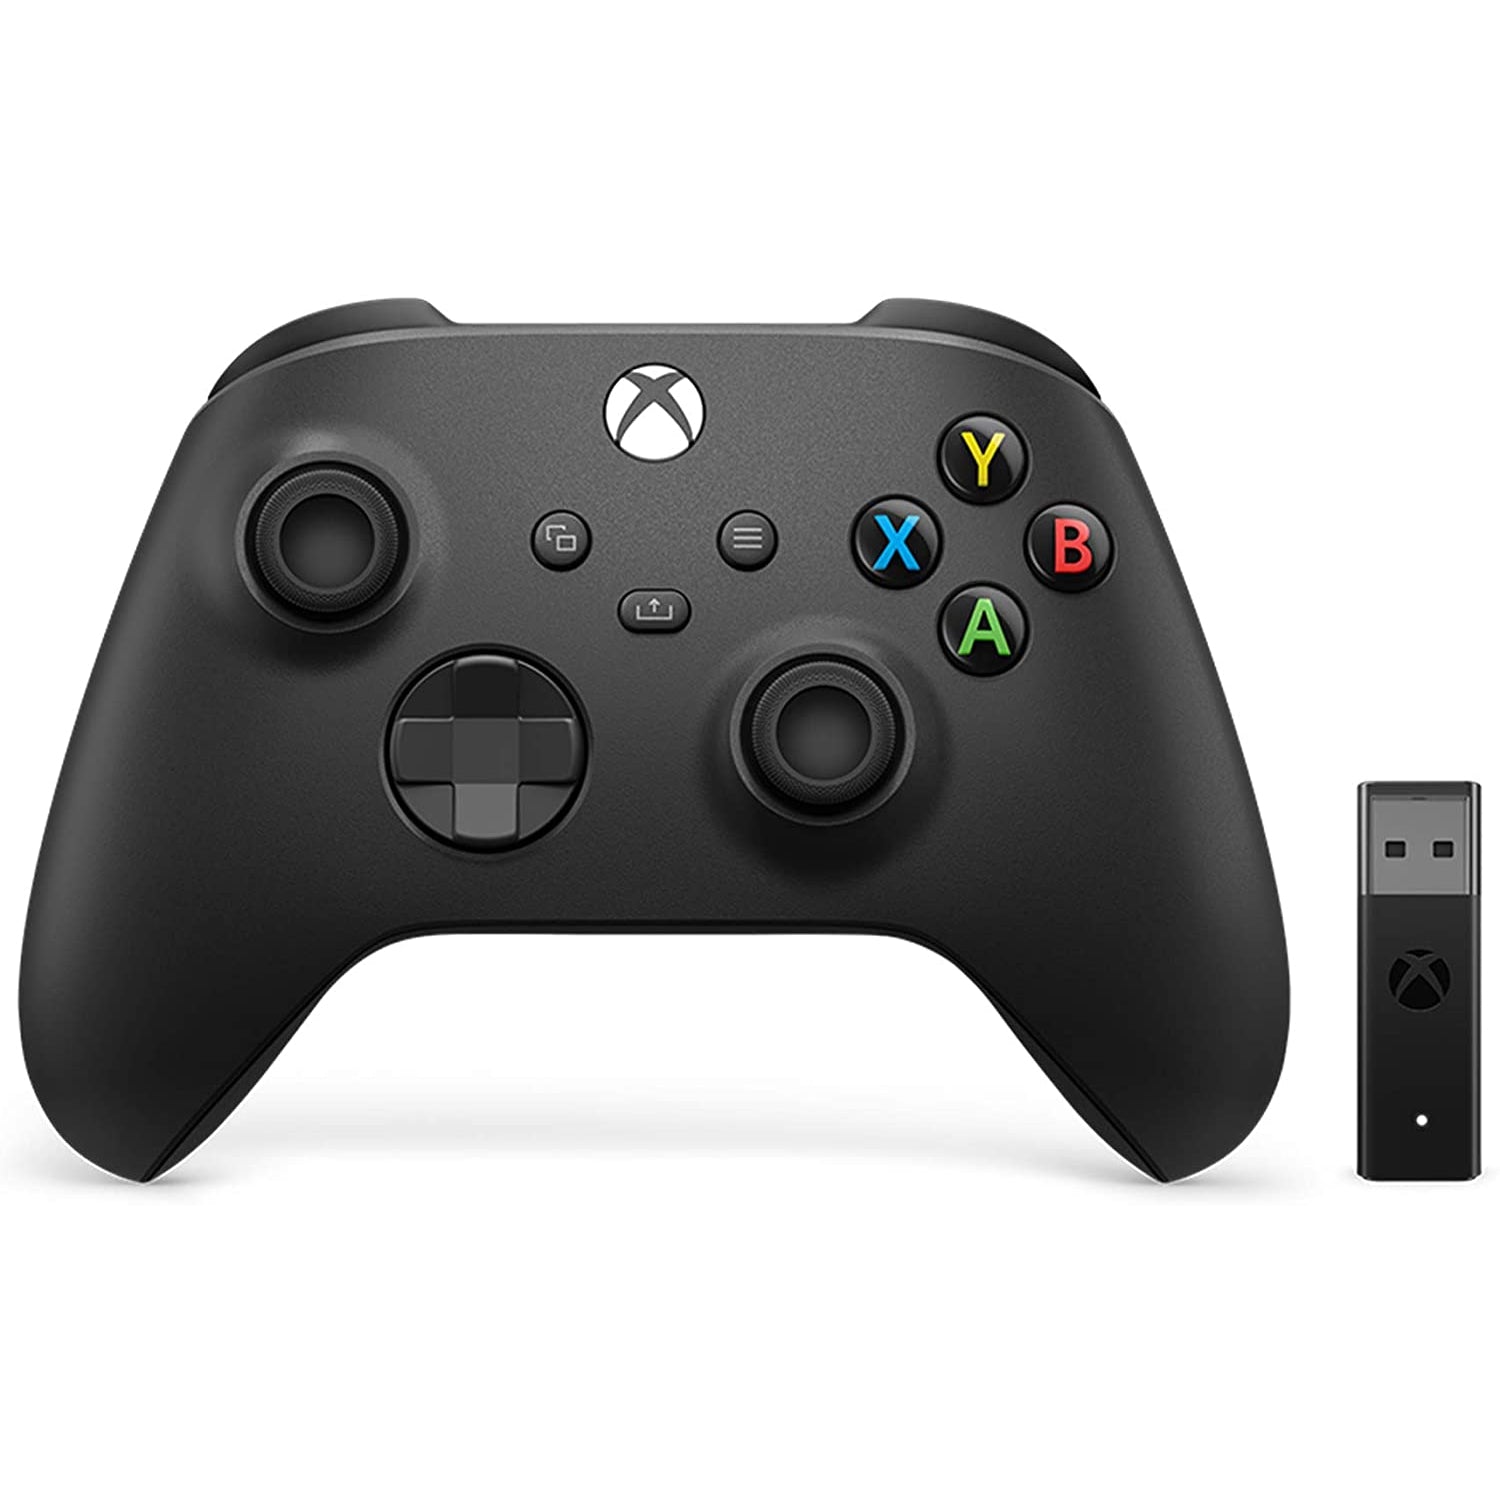 Xbox Wireless Controller + Wireless Adapter for Windows Carbon Black